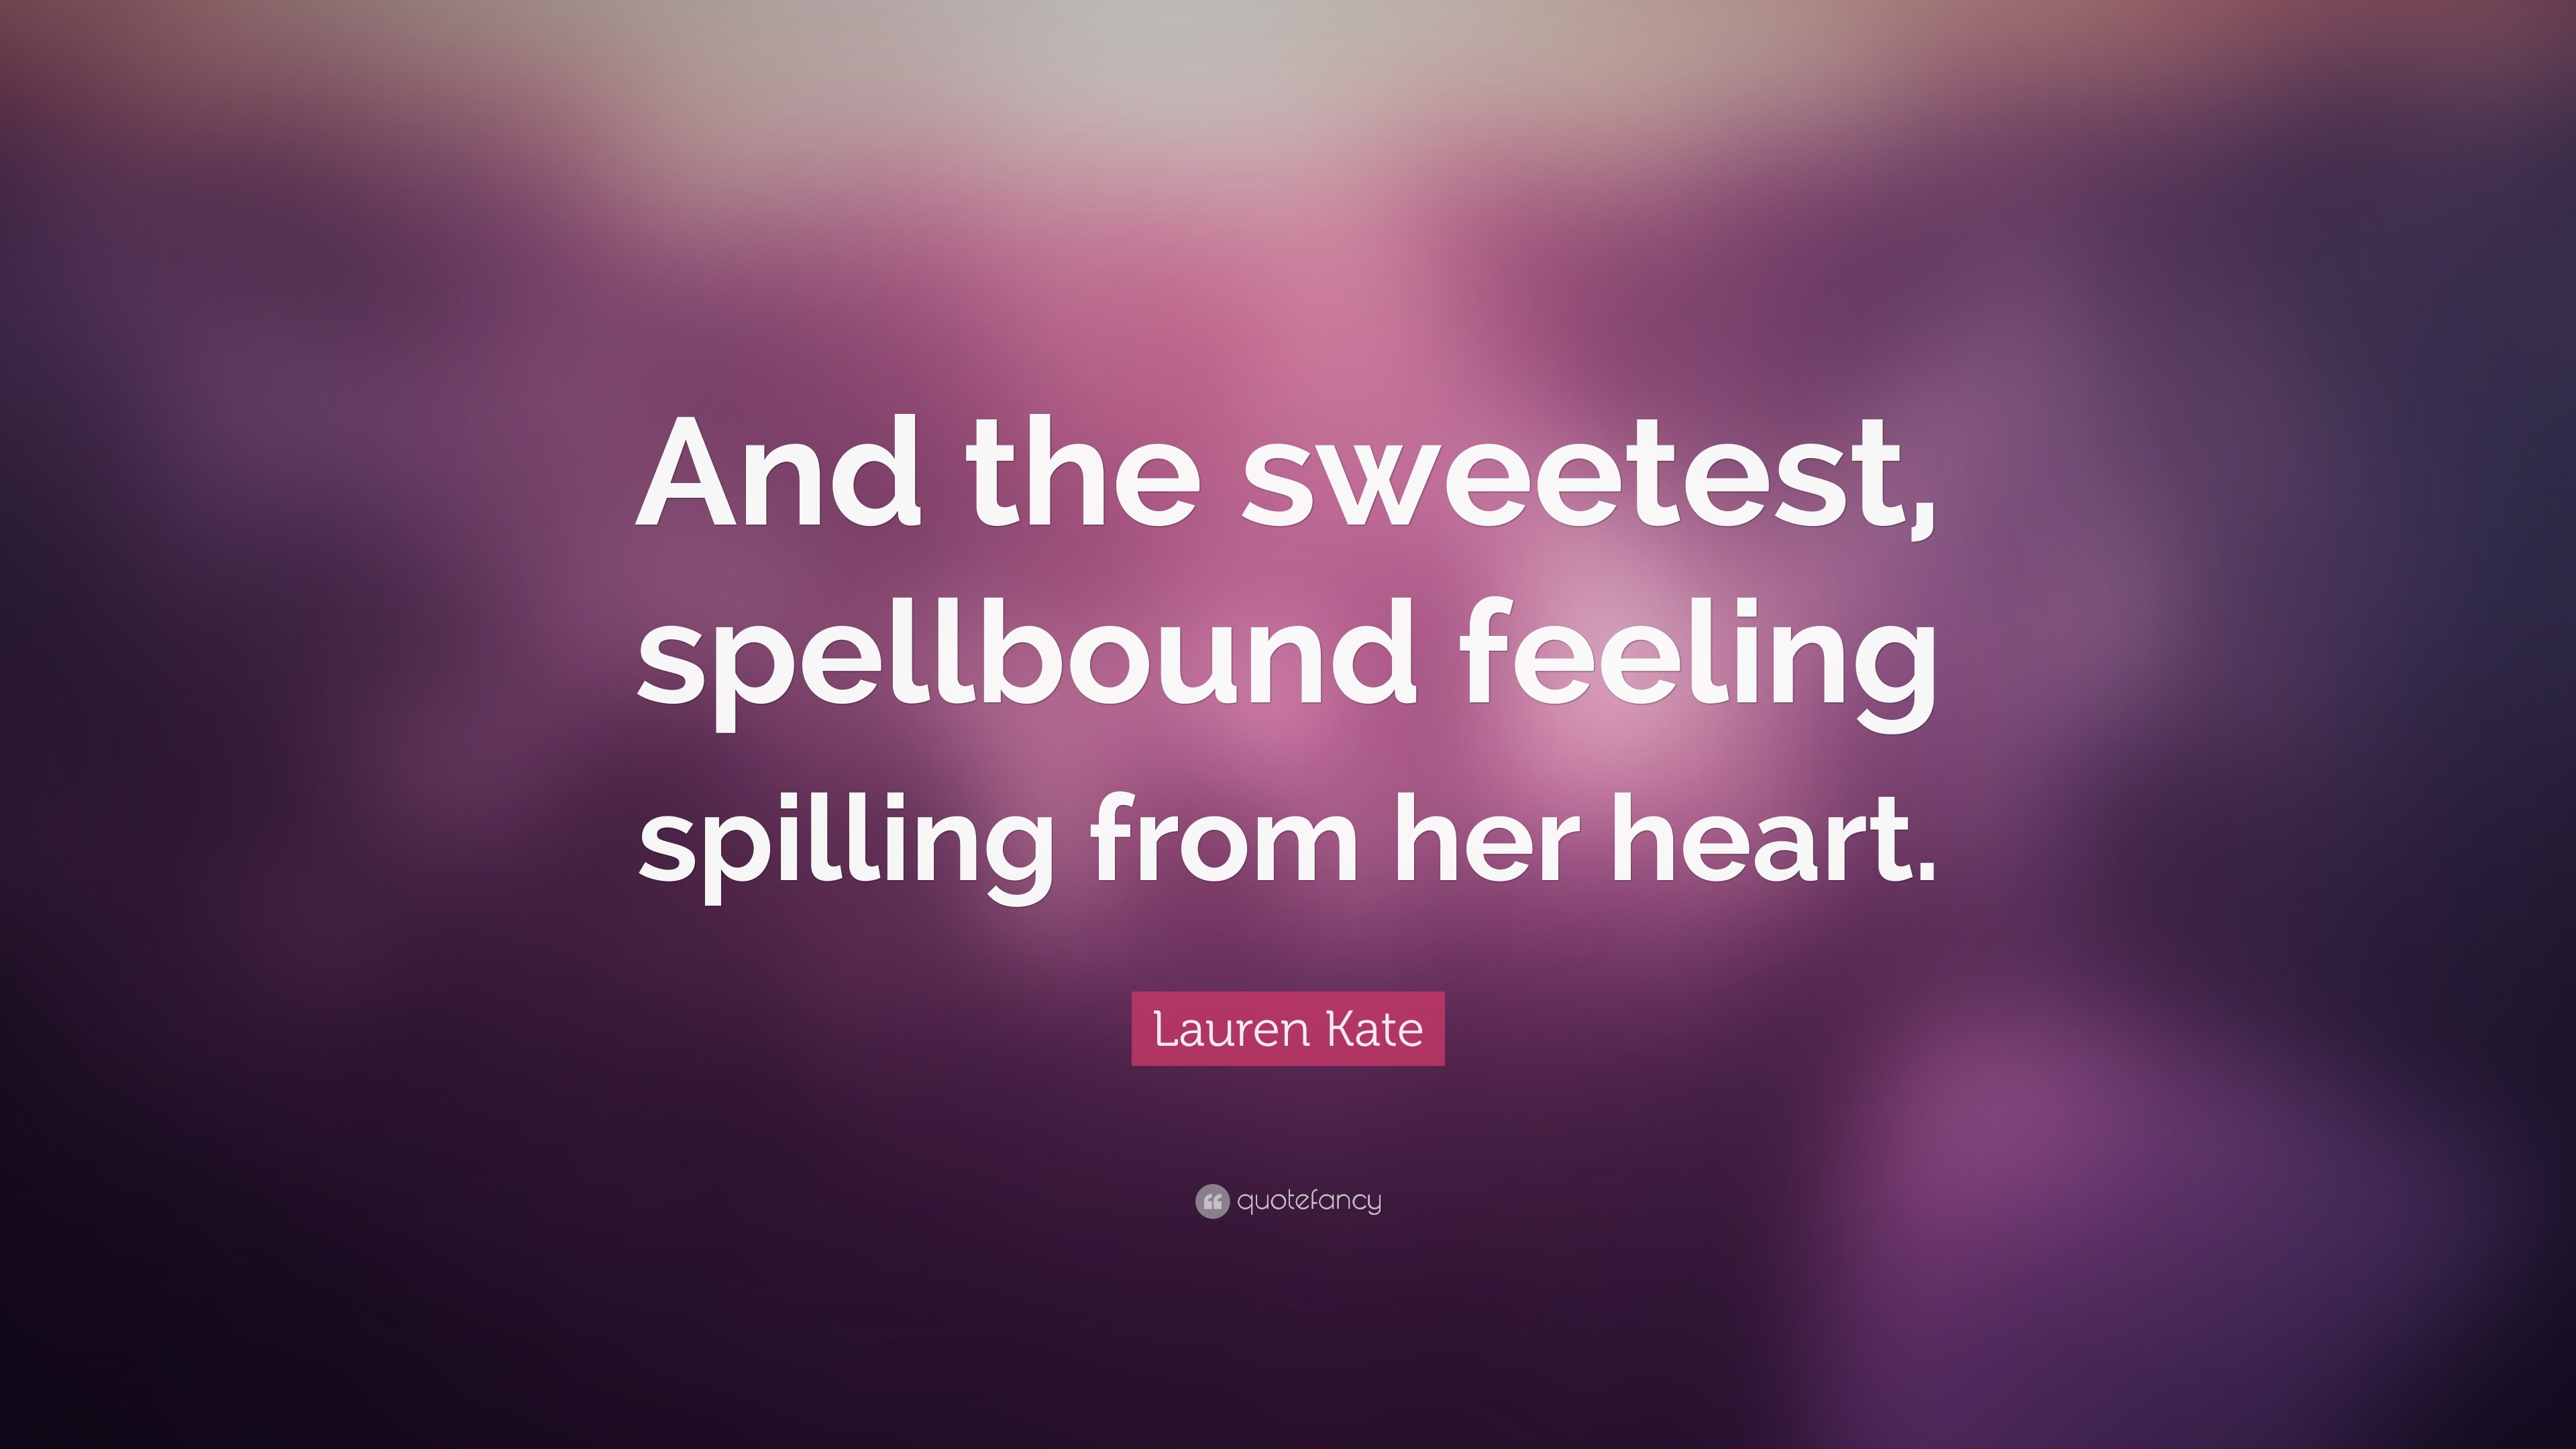 Lauren Kate Quote “and The Sweetest Spellbound Feeling Spilling From Her Heart” 8393